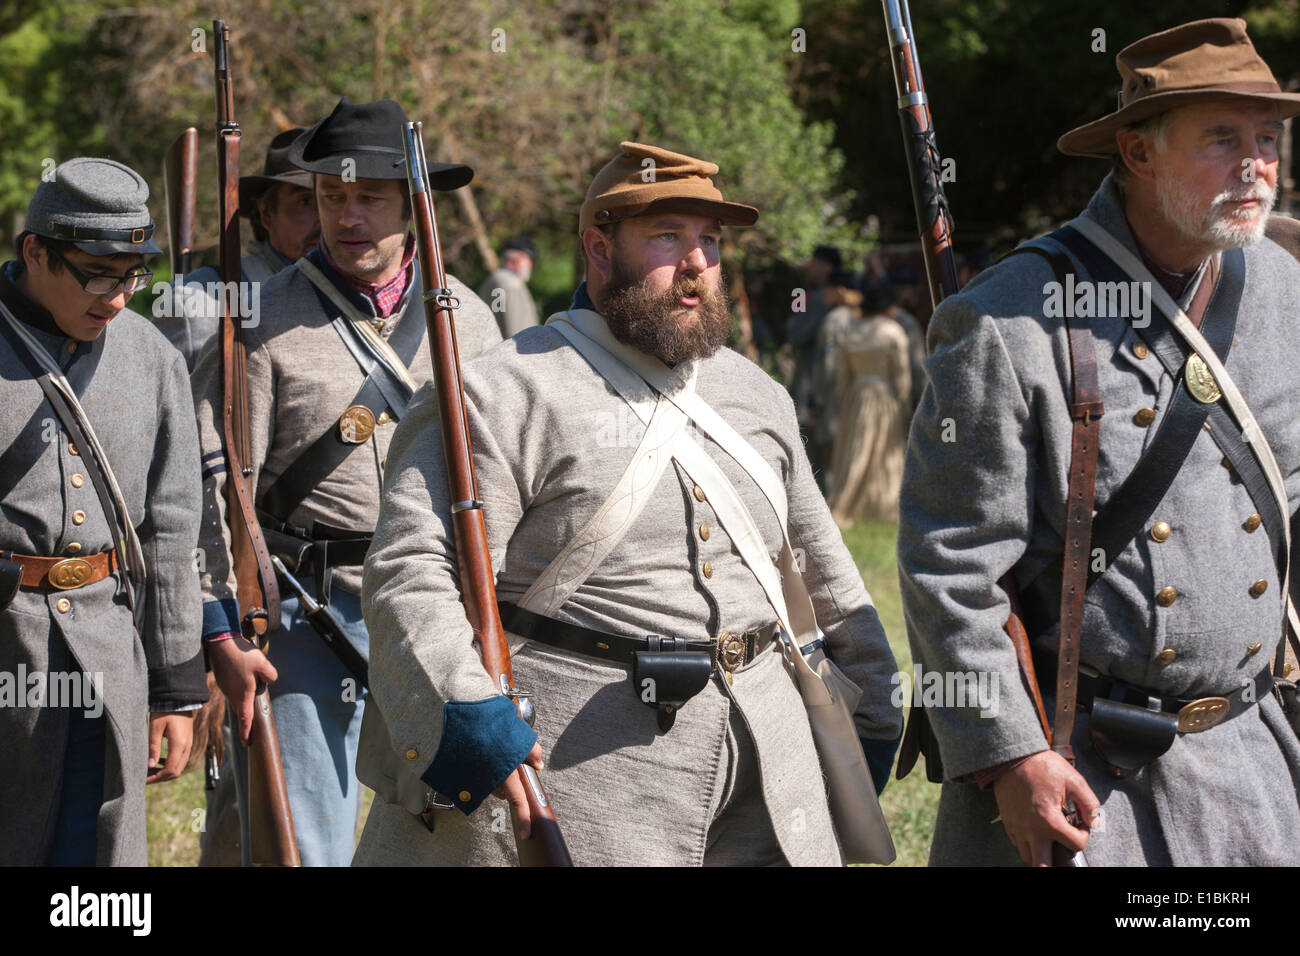 Confederate reenactors on the march. Stock Photo